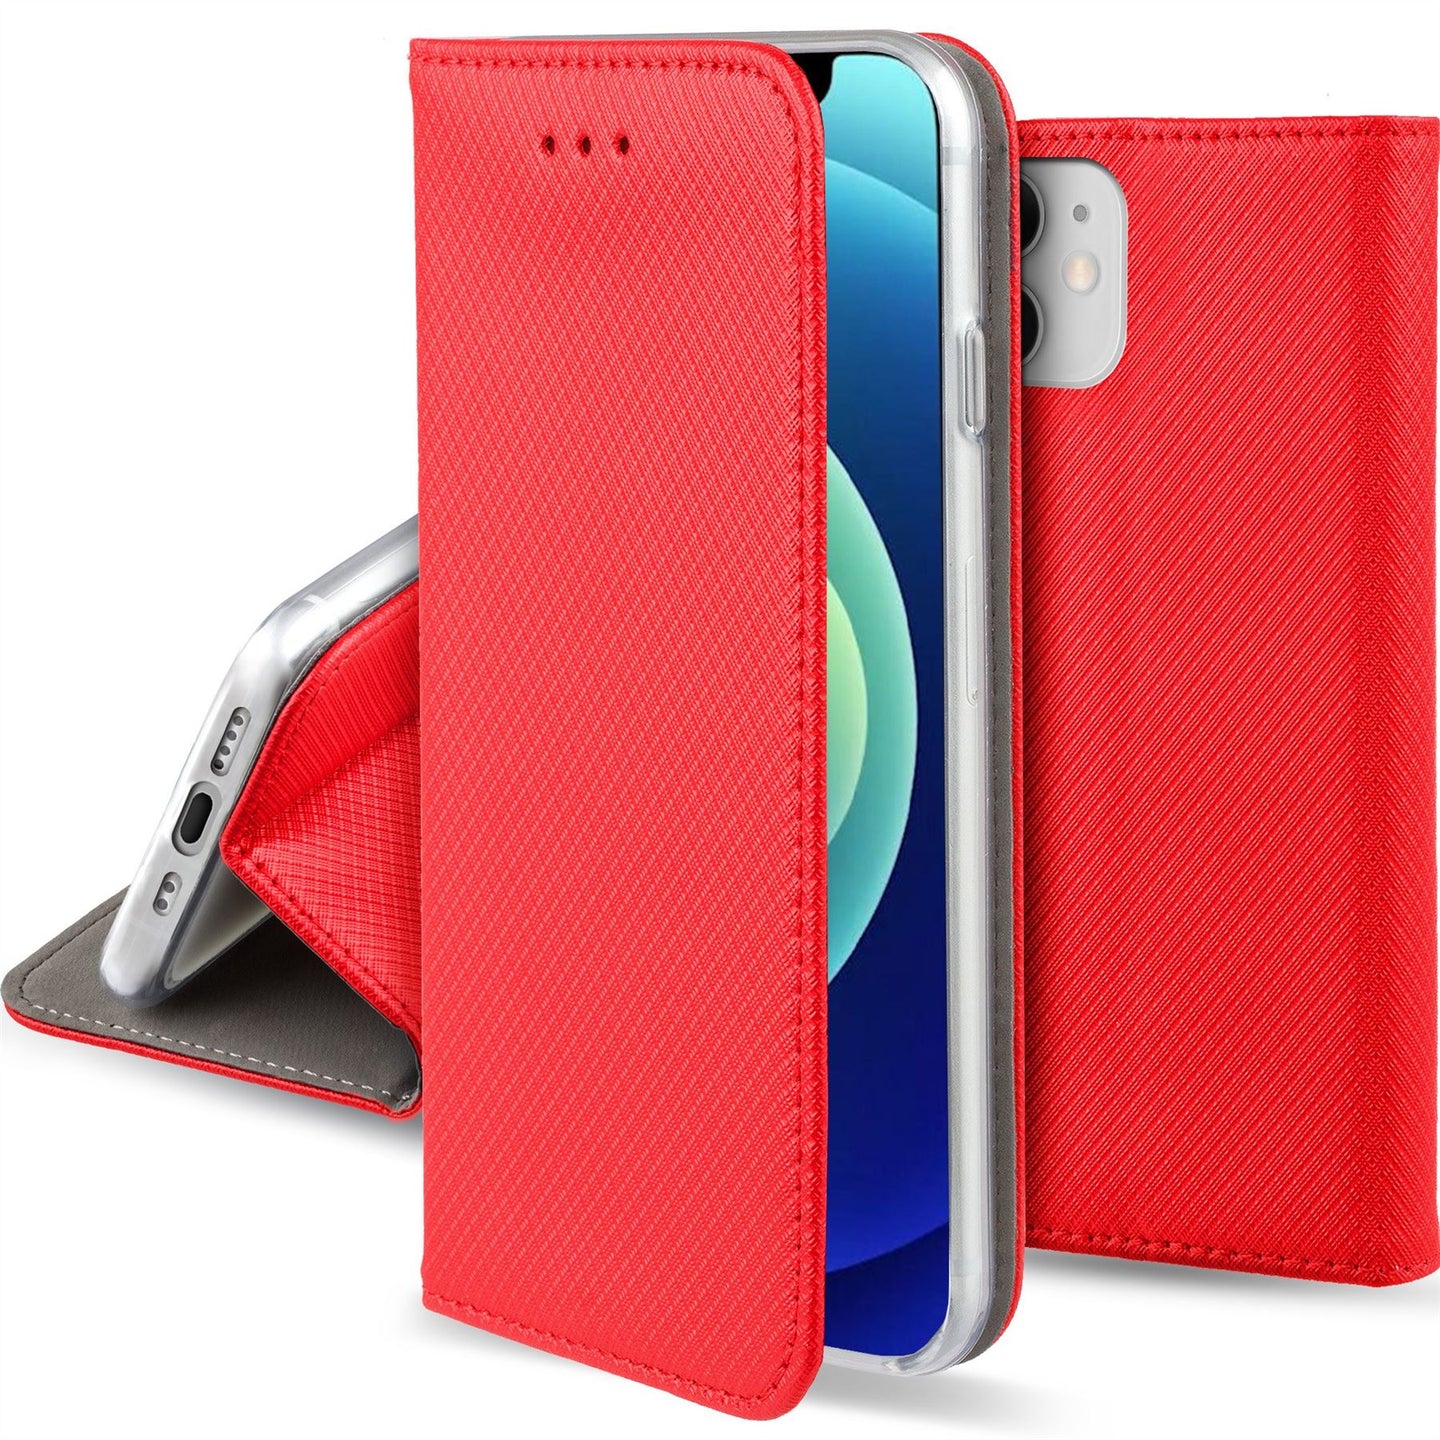 Moozy Case Flip Cover for iPhone 12 mini, Red - Smart Magnetic Flip Case with Card Holder and Stand